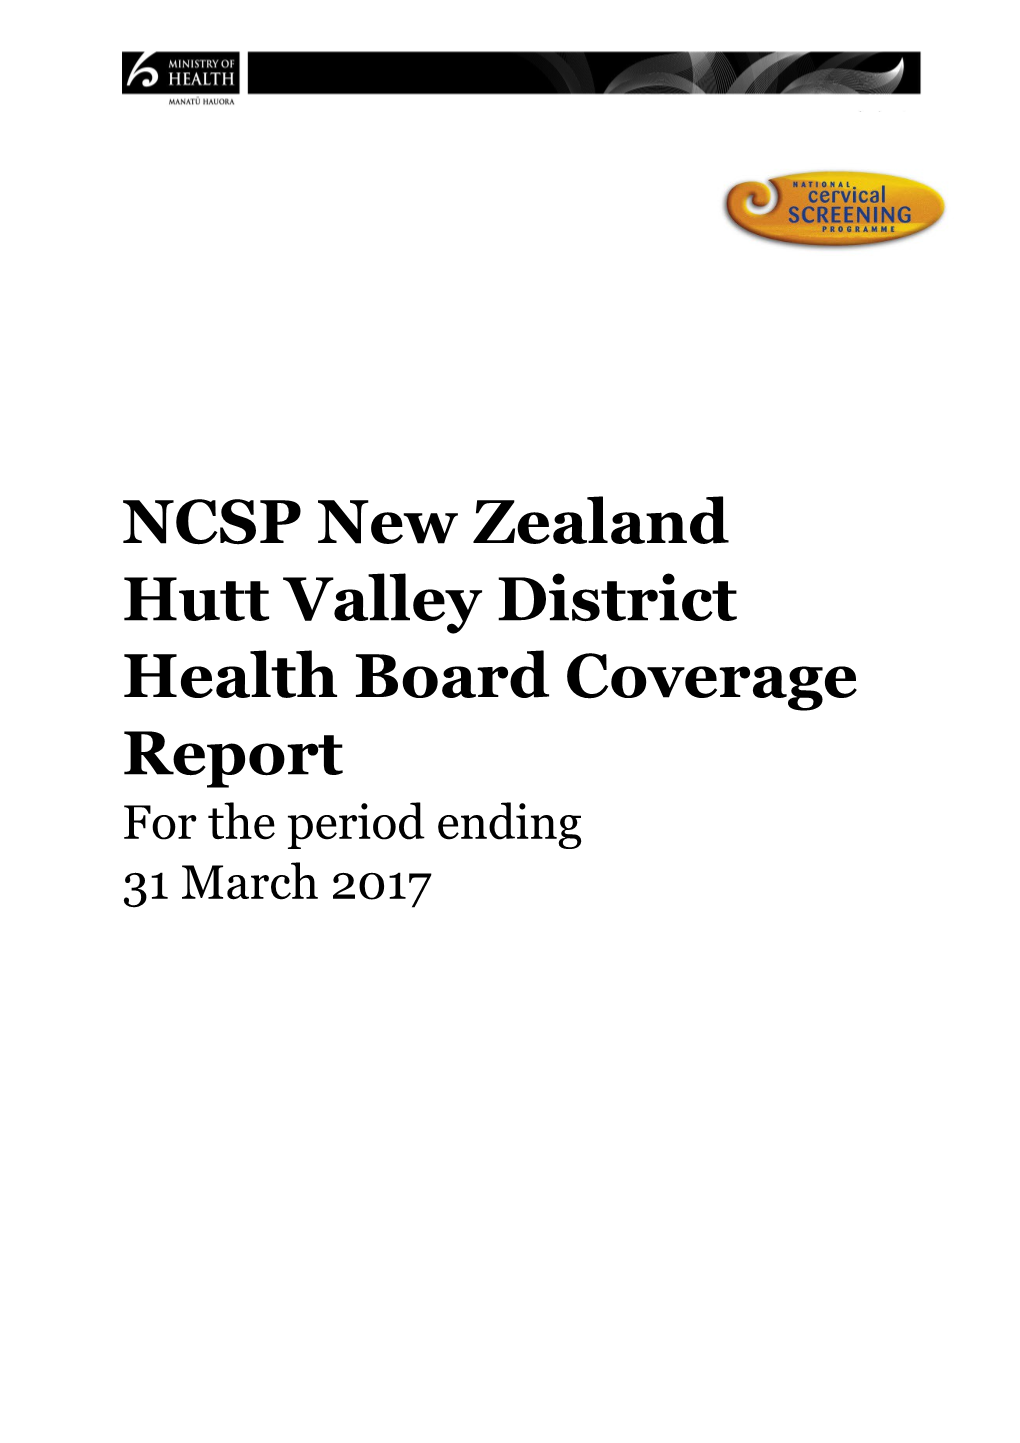 NCSP New Zealand Hutt Valley District Health Boardcoverage Report